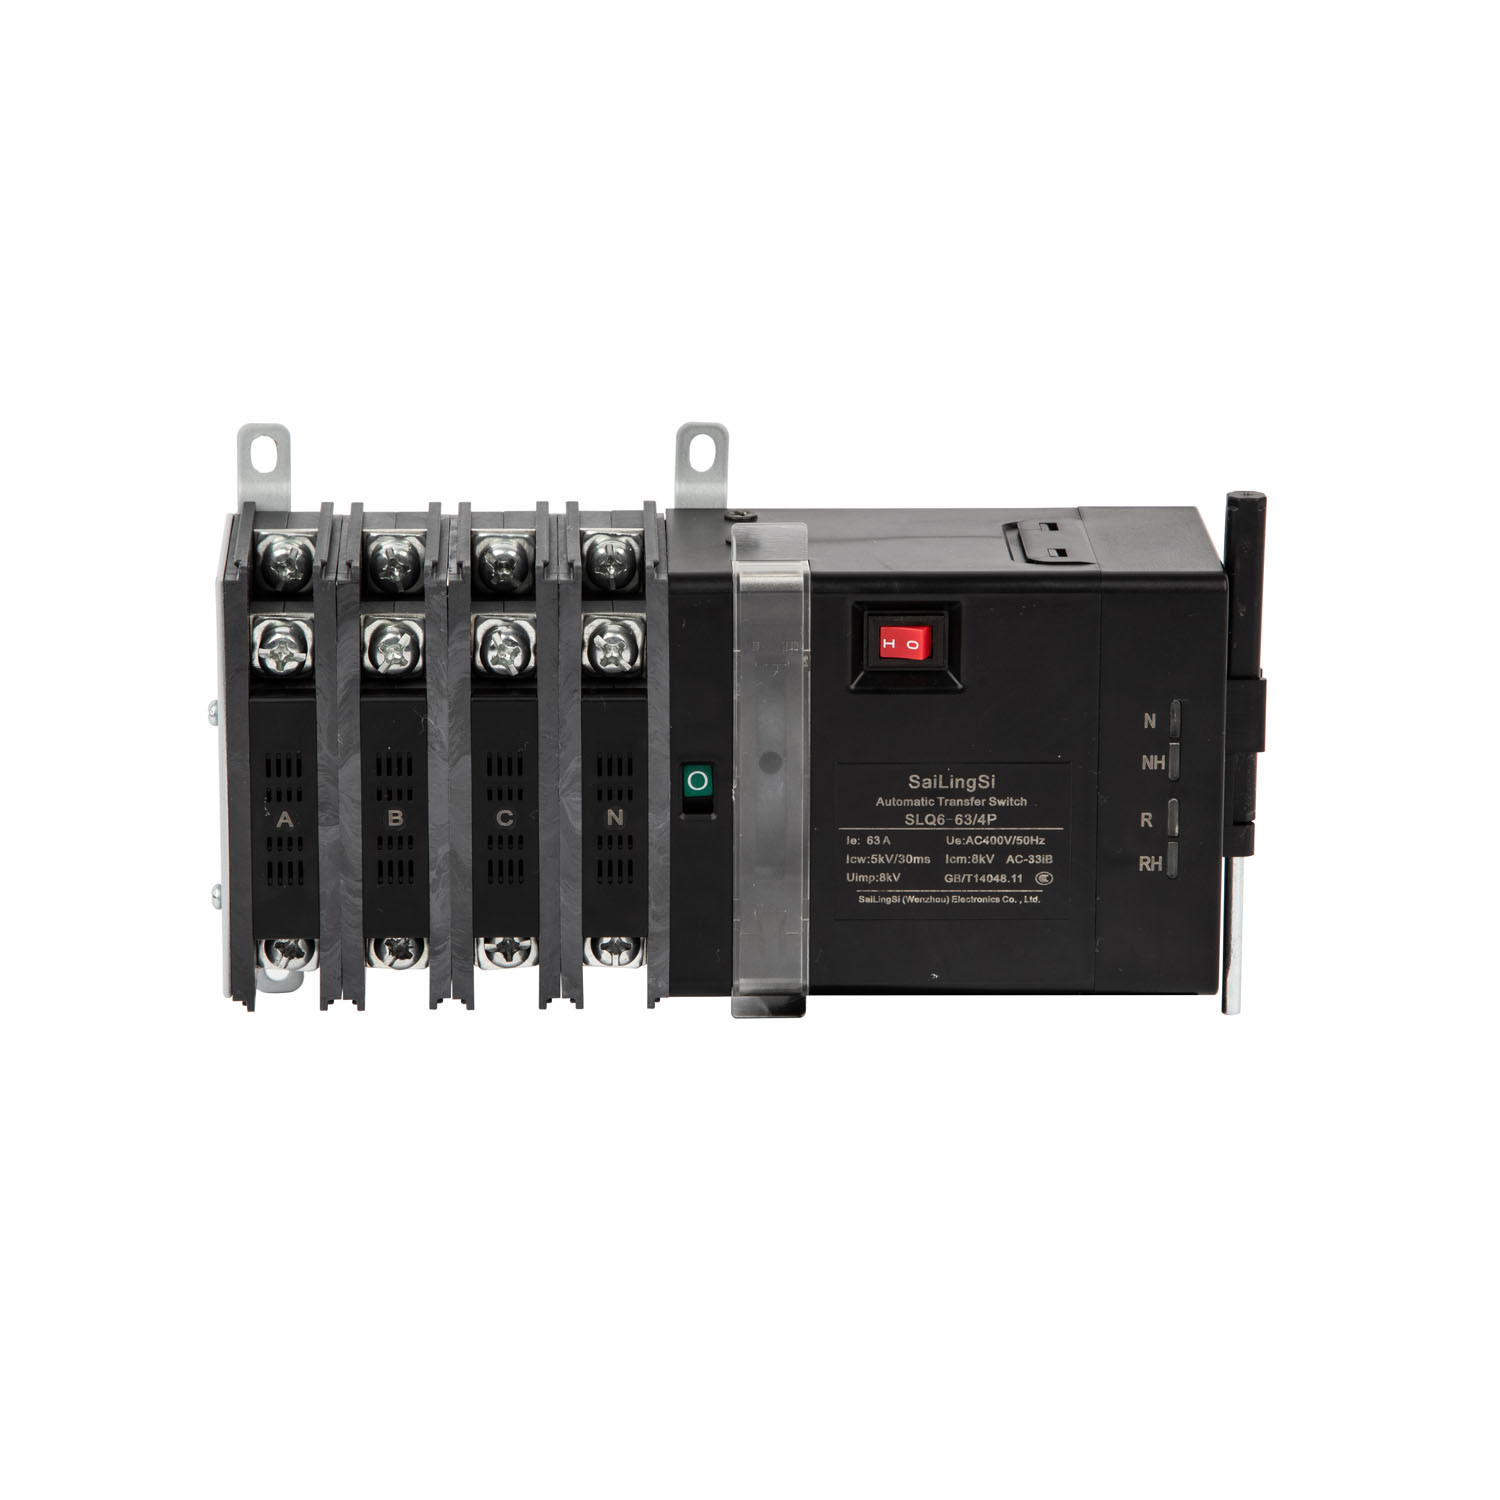 Solar Power to City Power ATS 125A 4p Automatic Transfer Switch ATS with Fire Control